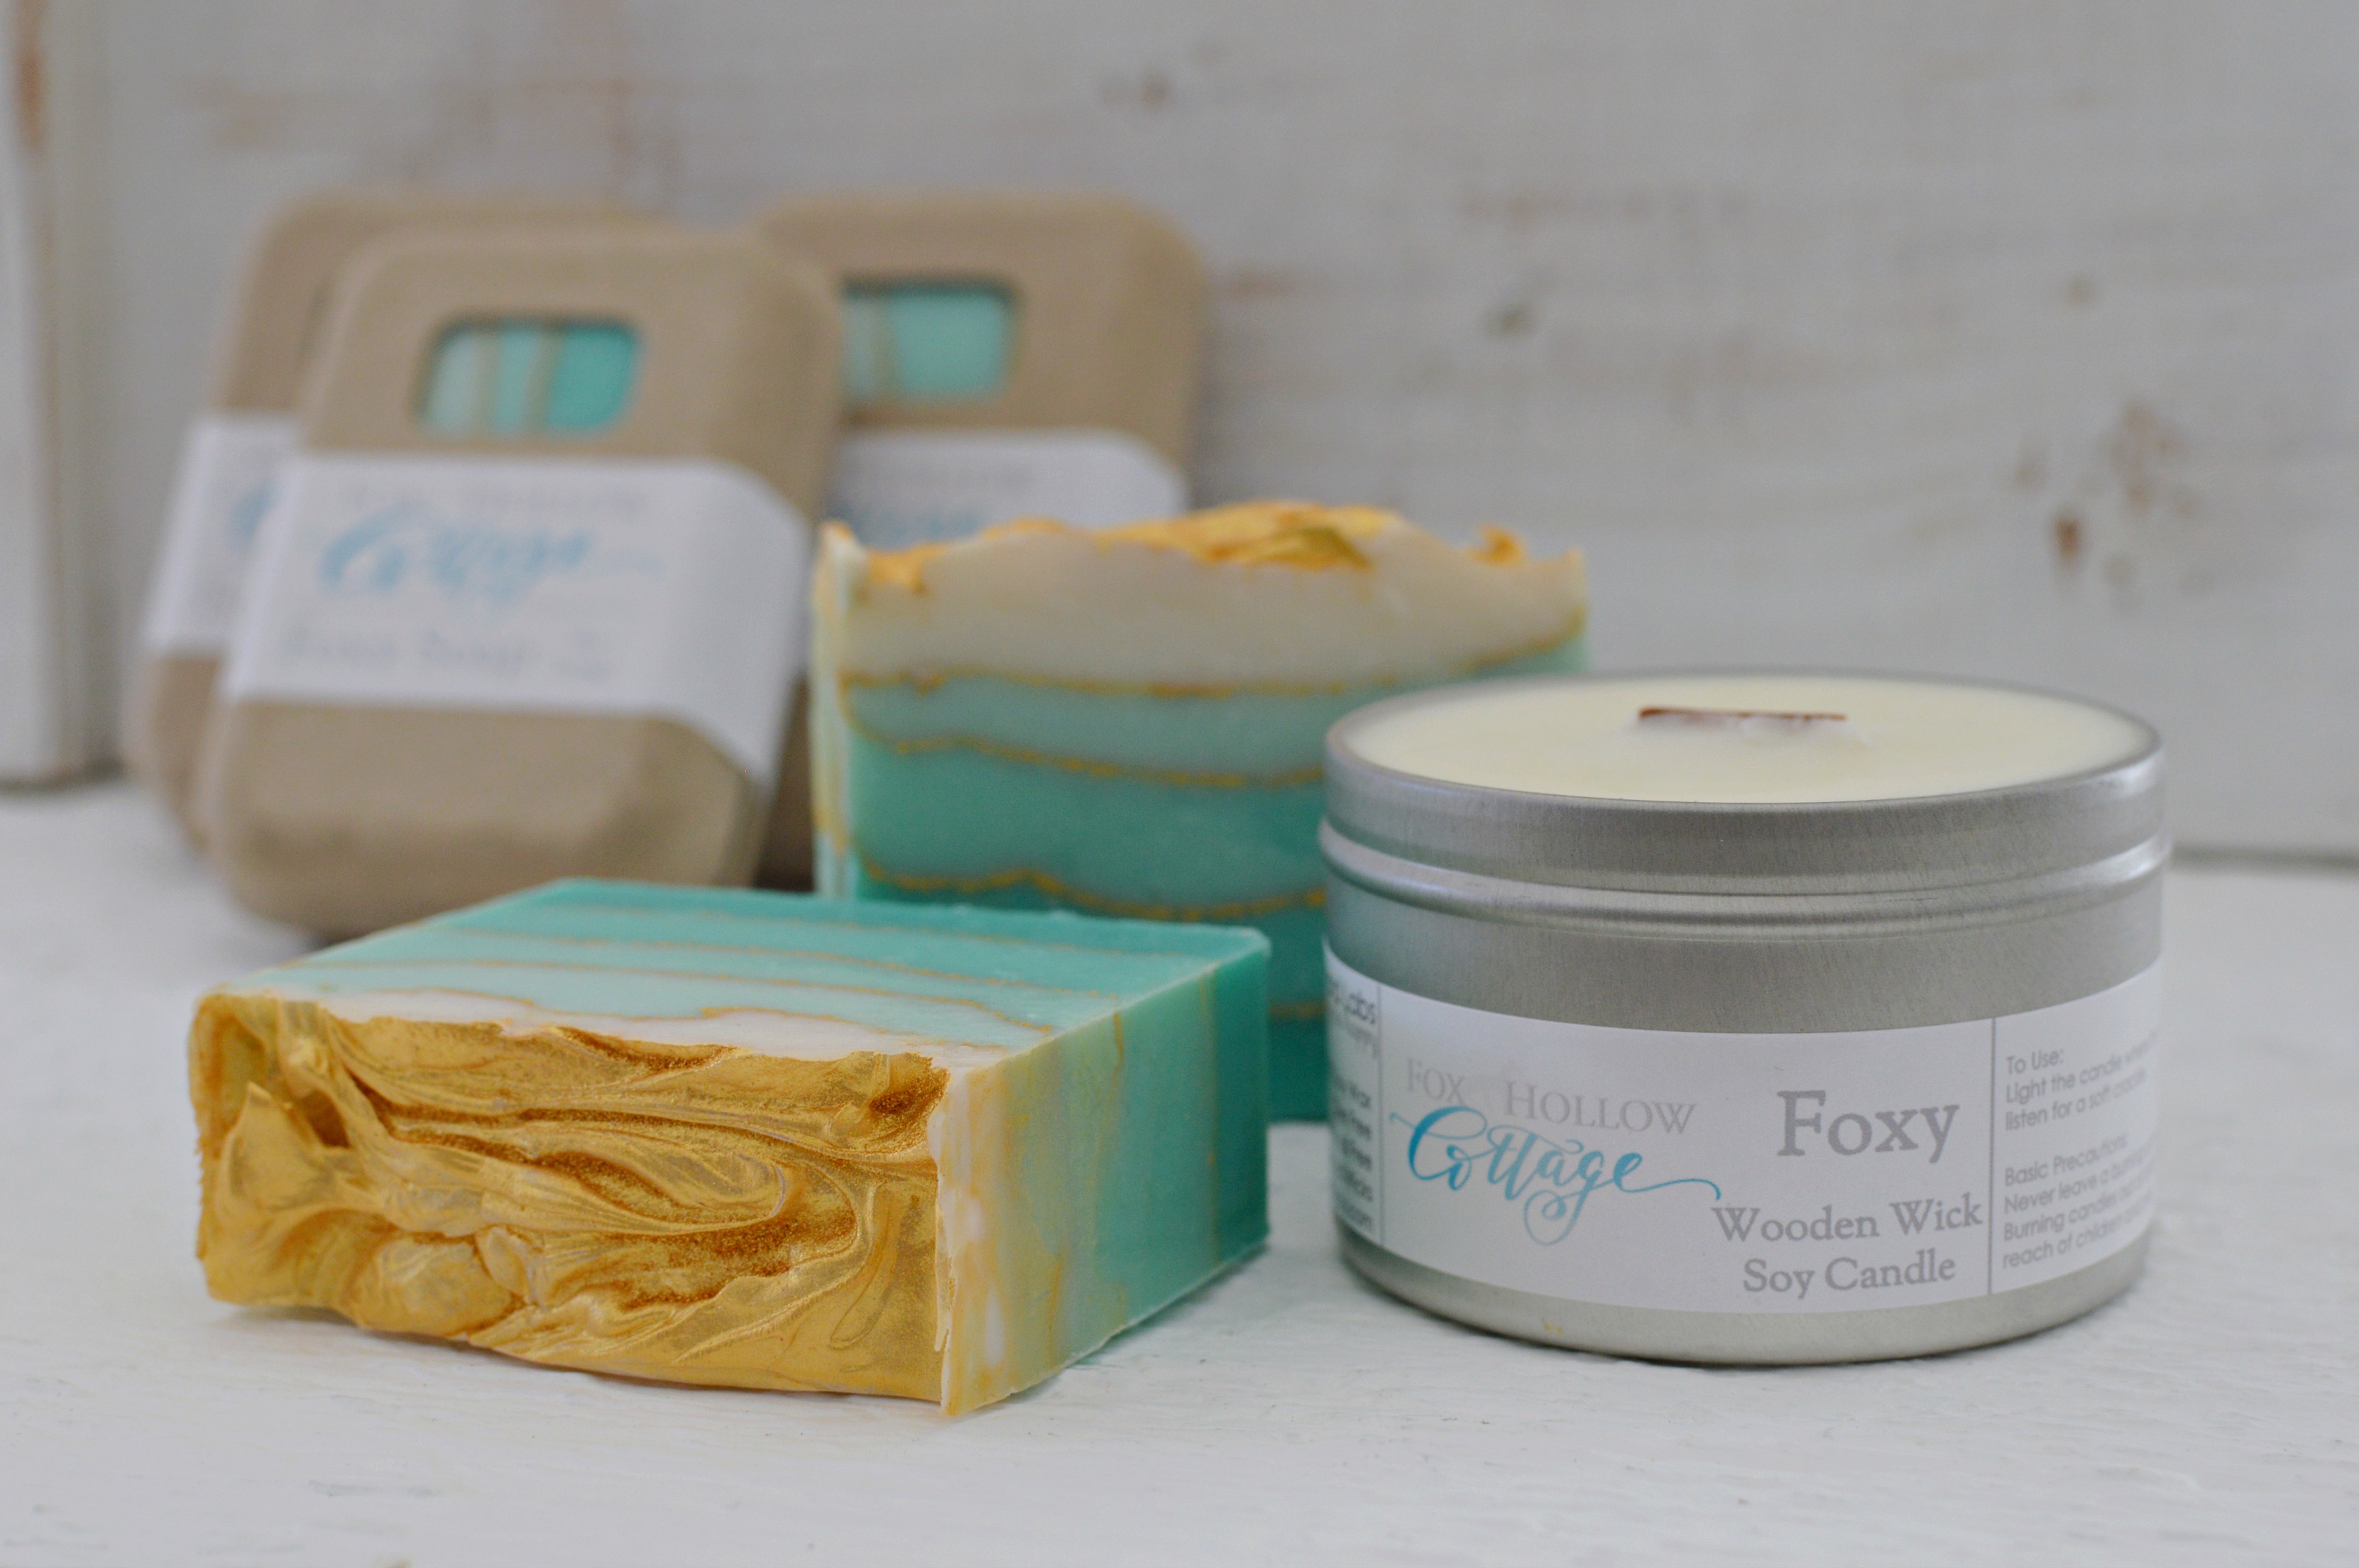 Introducing Foxy Body and Home Fragrance. Artisanal small batch soap and hand poured wooden wick soy candles. By Canard Labs for foxhollowcottage.com 